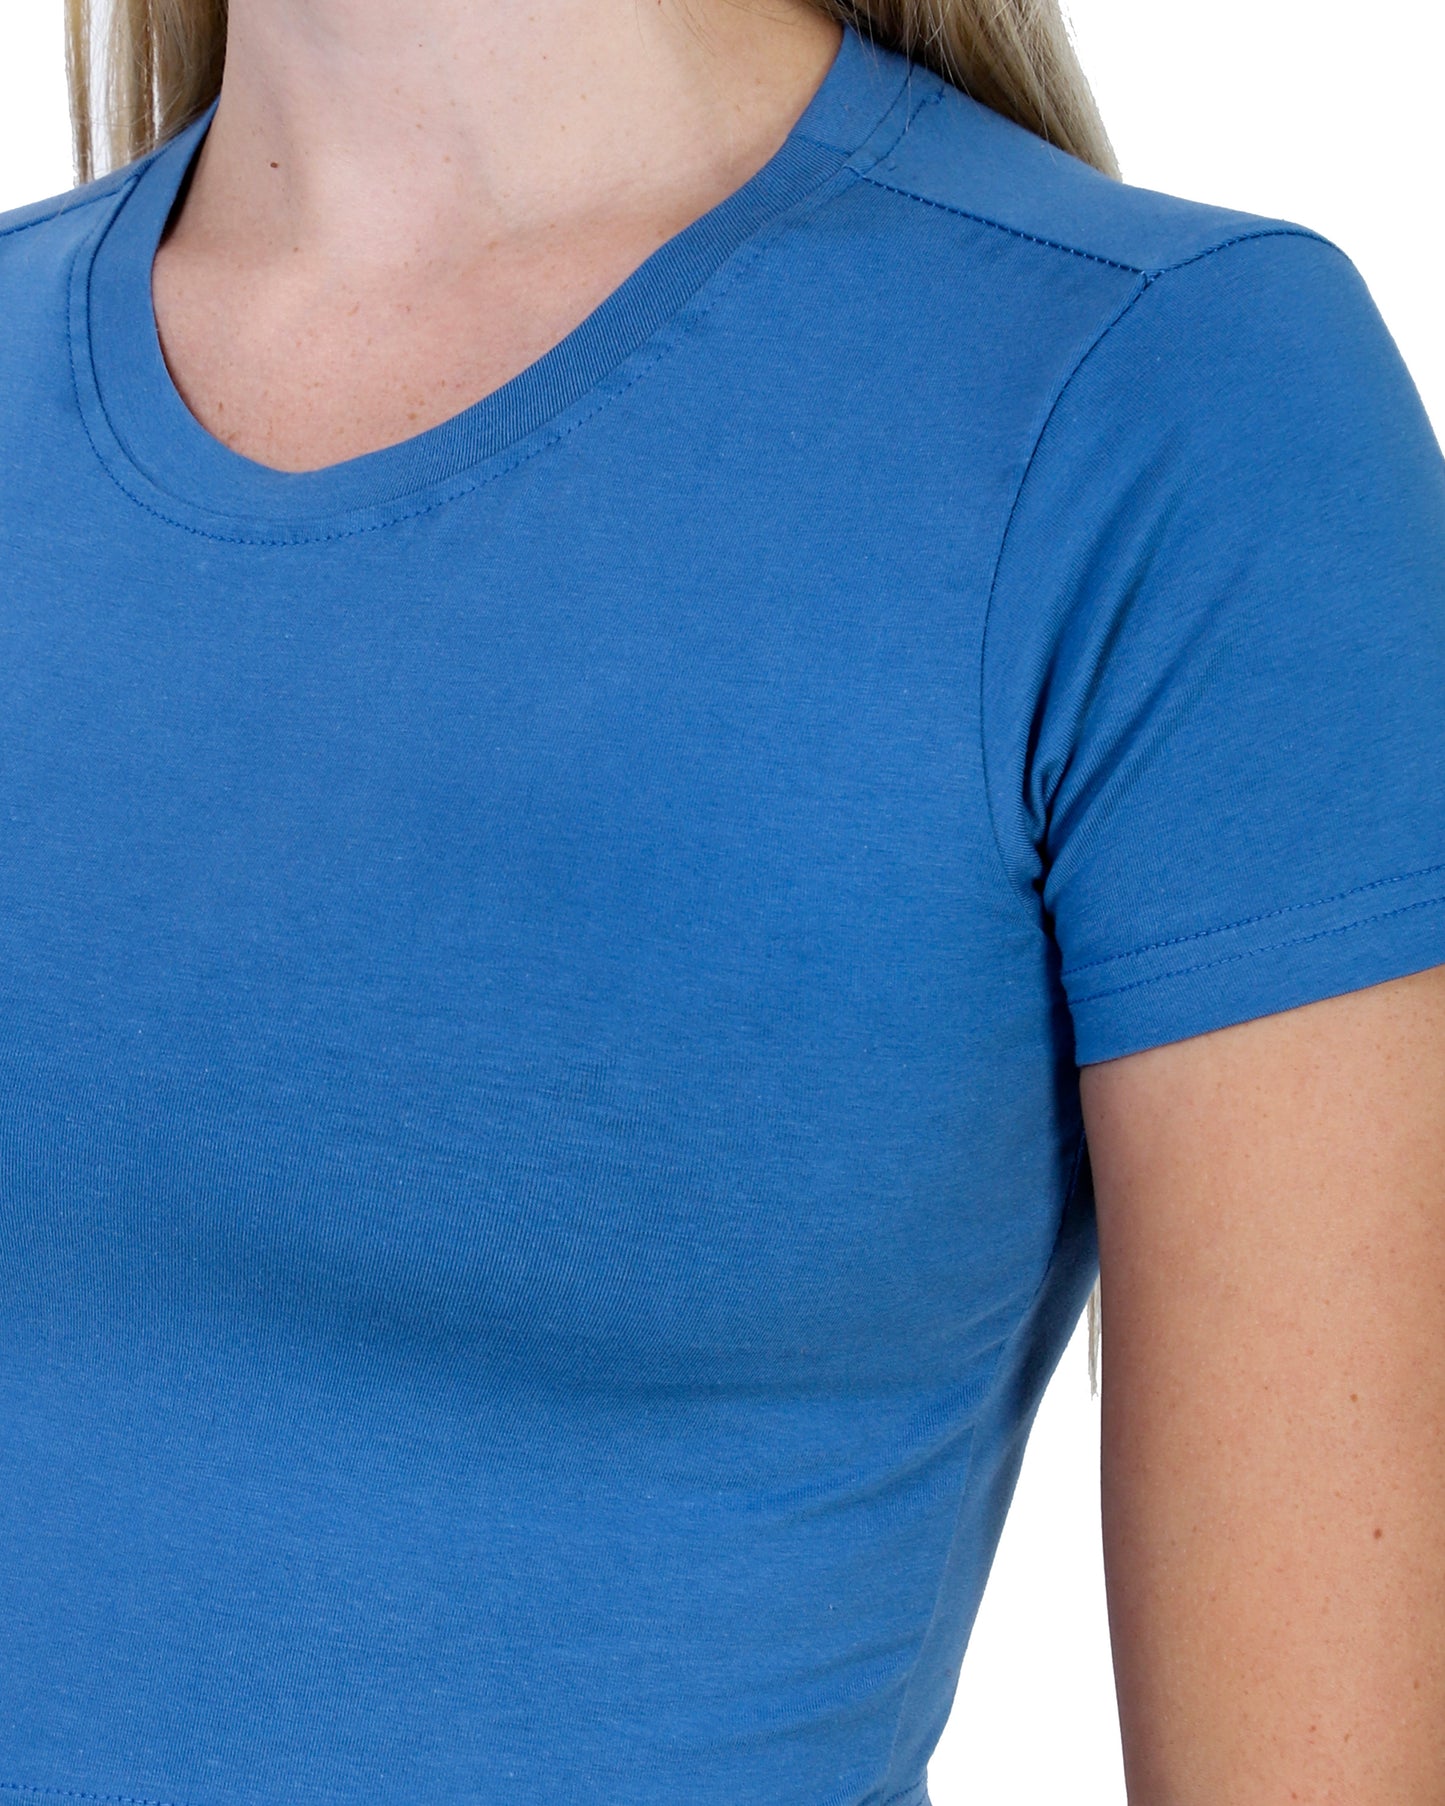 Solid Dusky Blue Baby Tee for Women